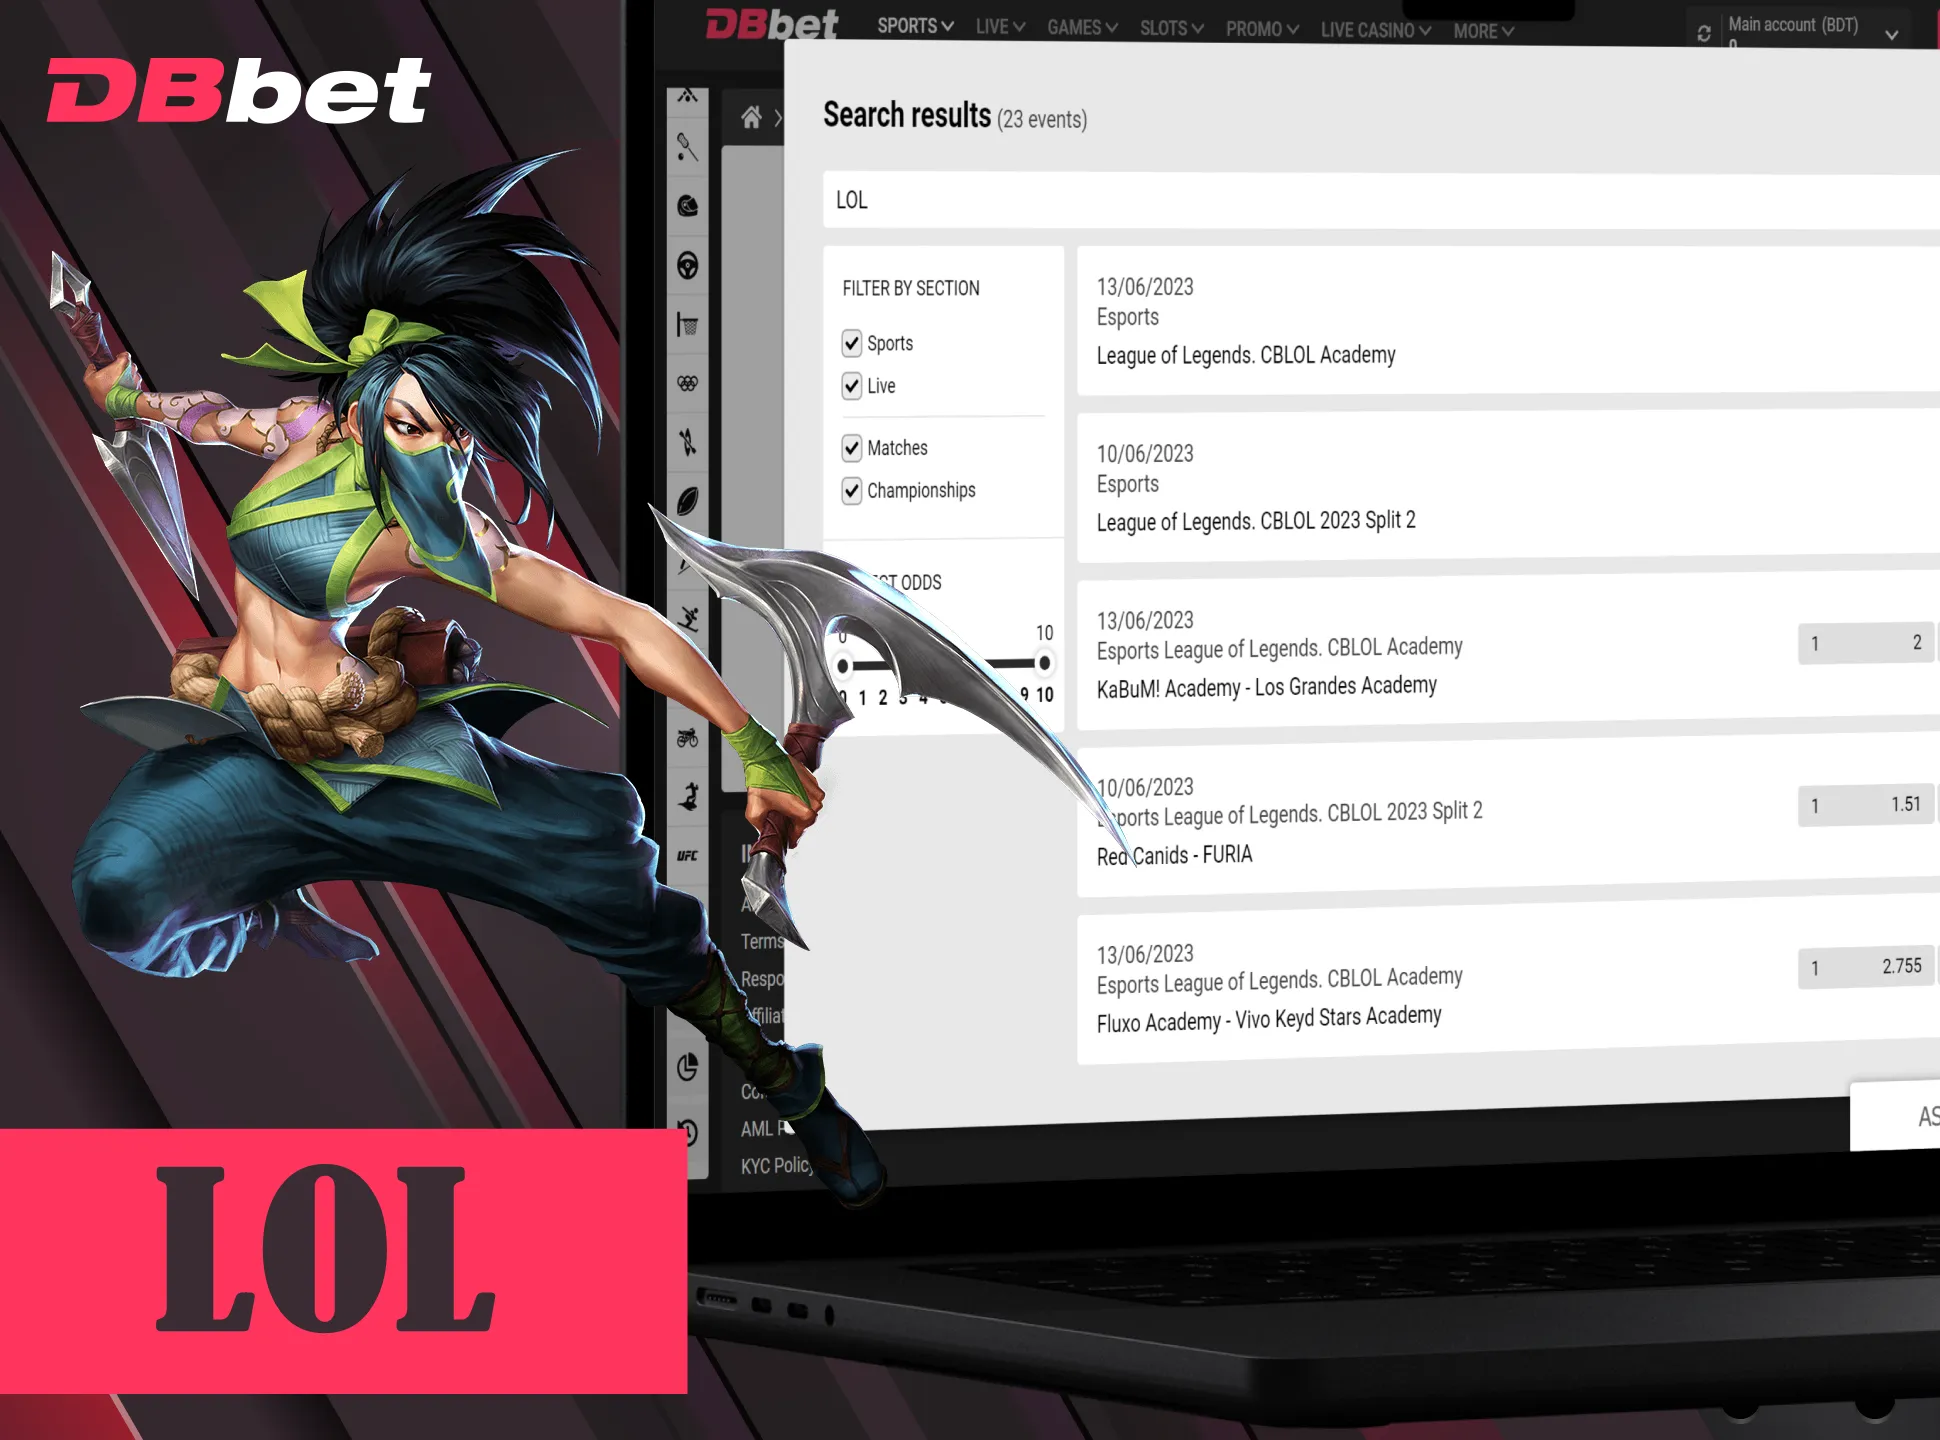 Bet on exciting League of Legends matches at DBbet.